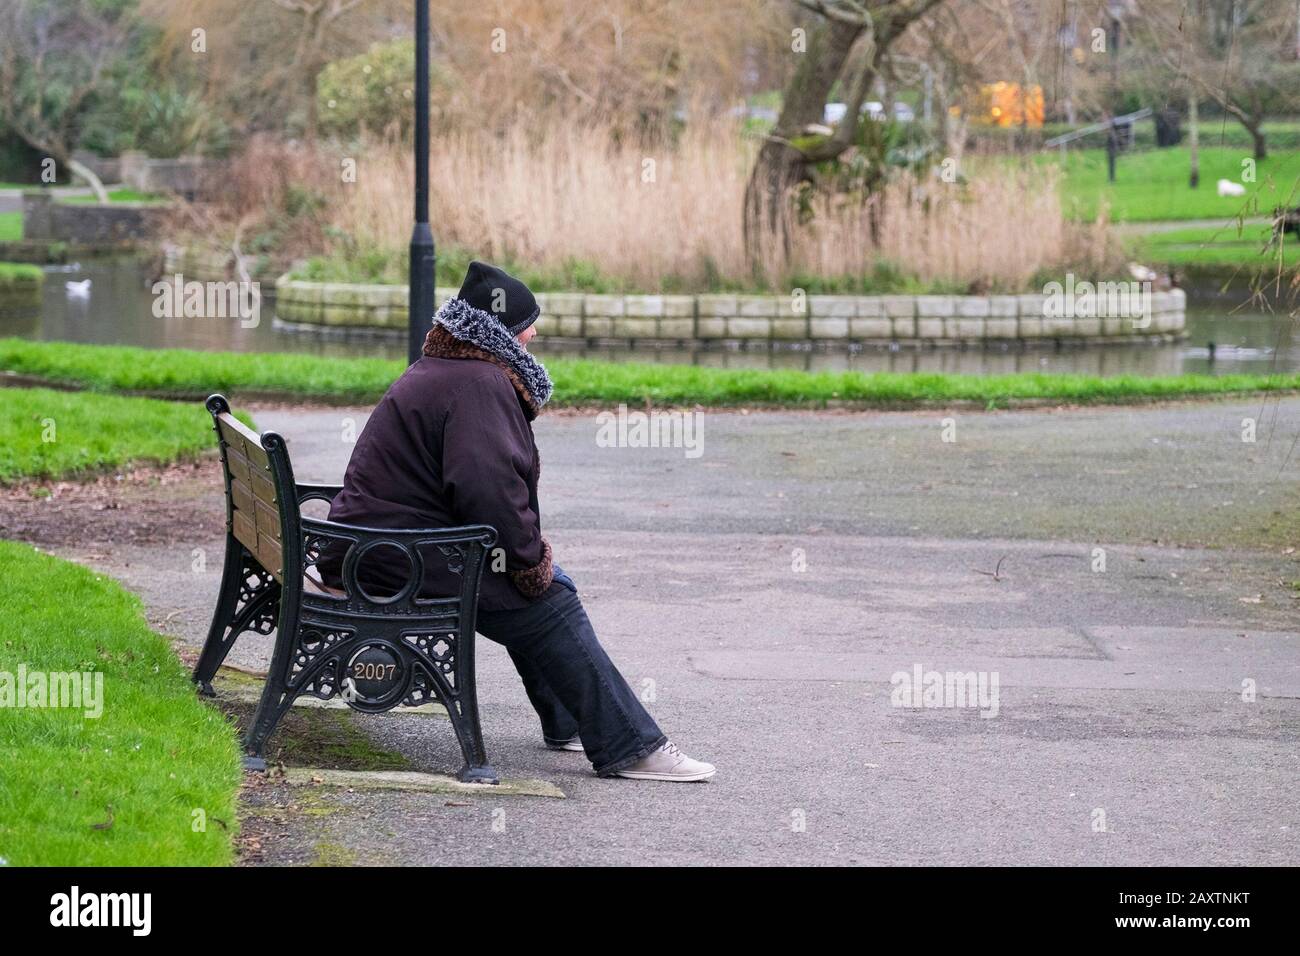 A woman sitting alone on a park bench wrapped up against bthe cold weather. Stock Photo